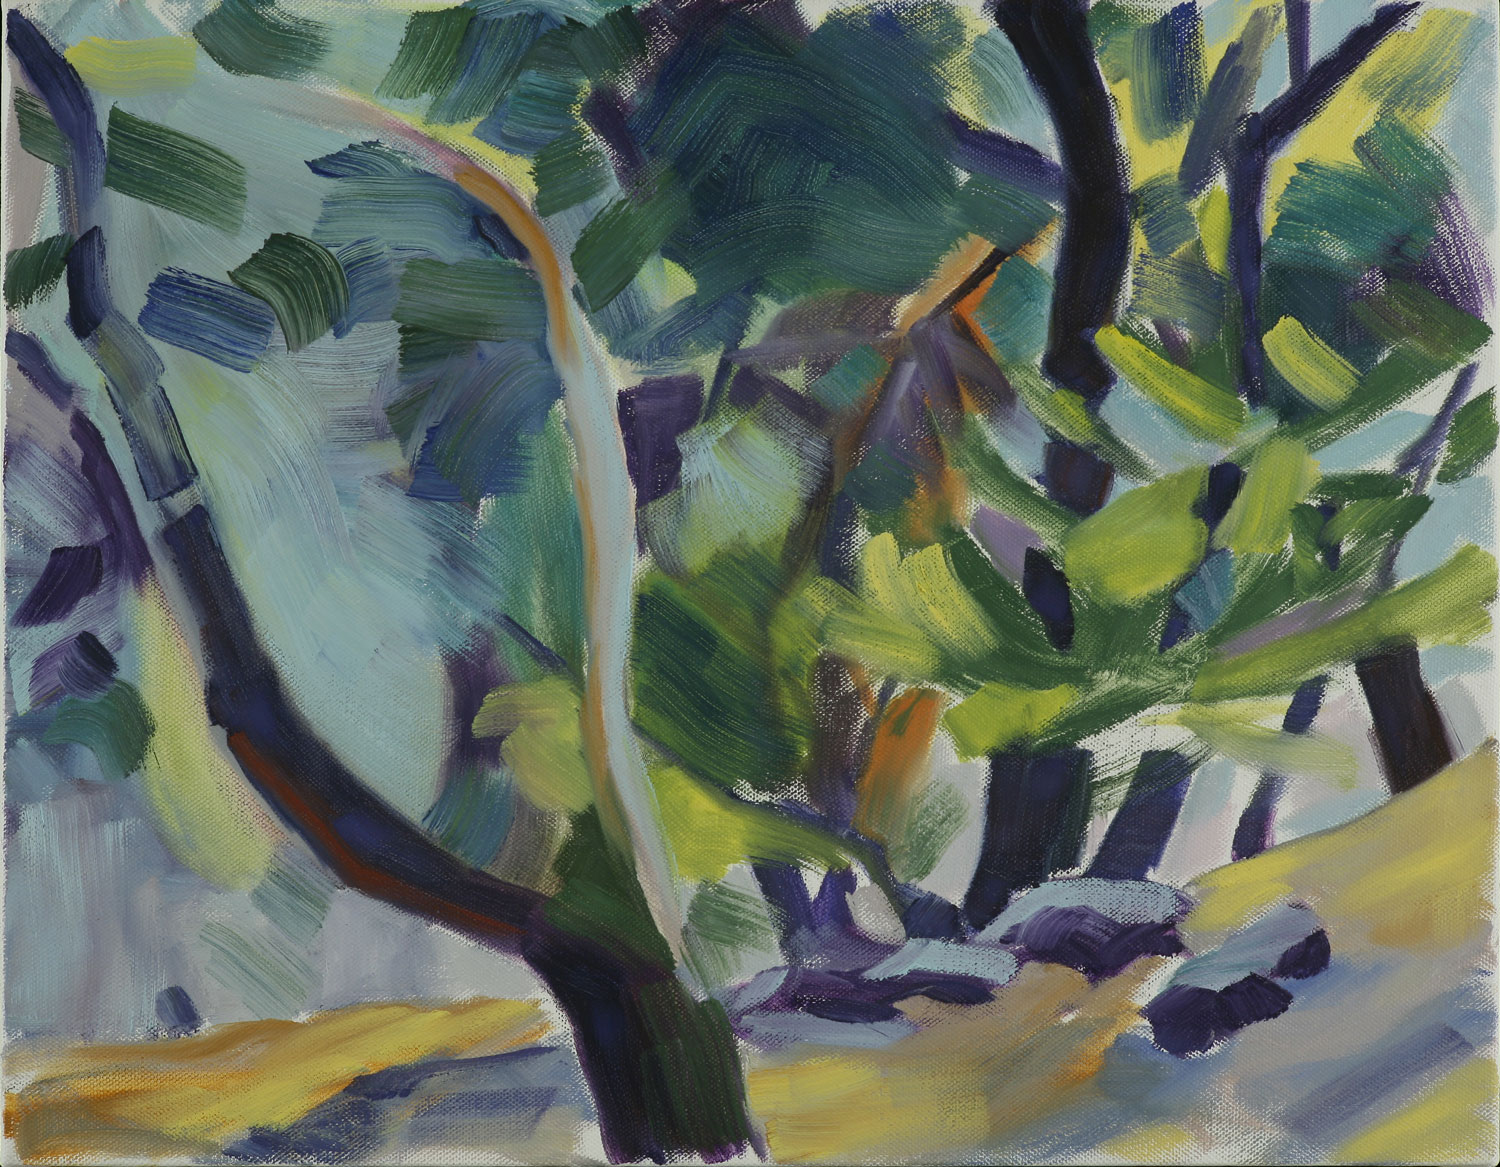   Windy Trees , 2010, oil on canvas, 18 x 14" 